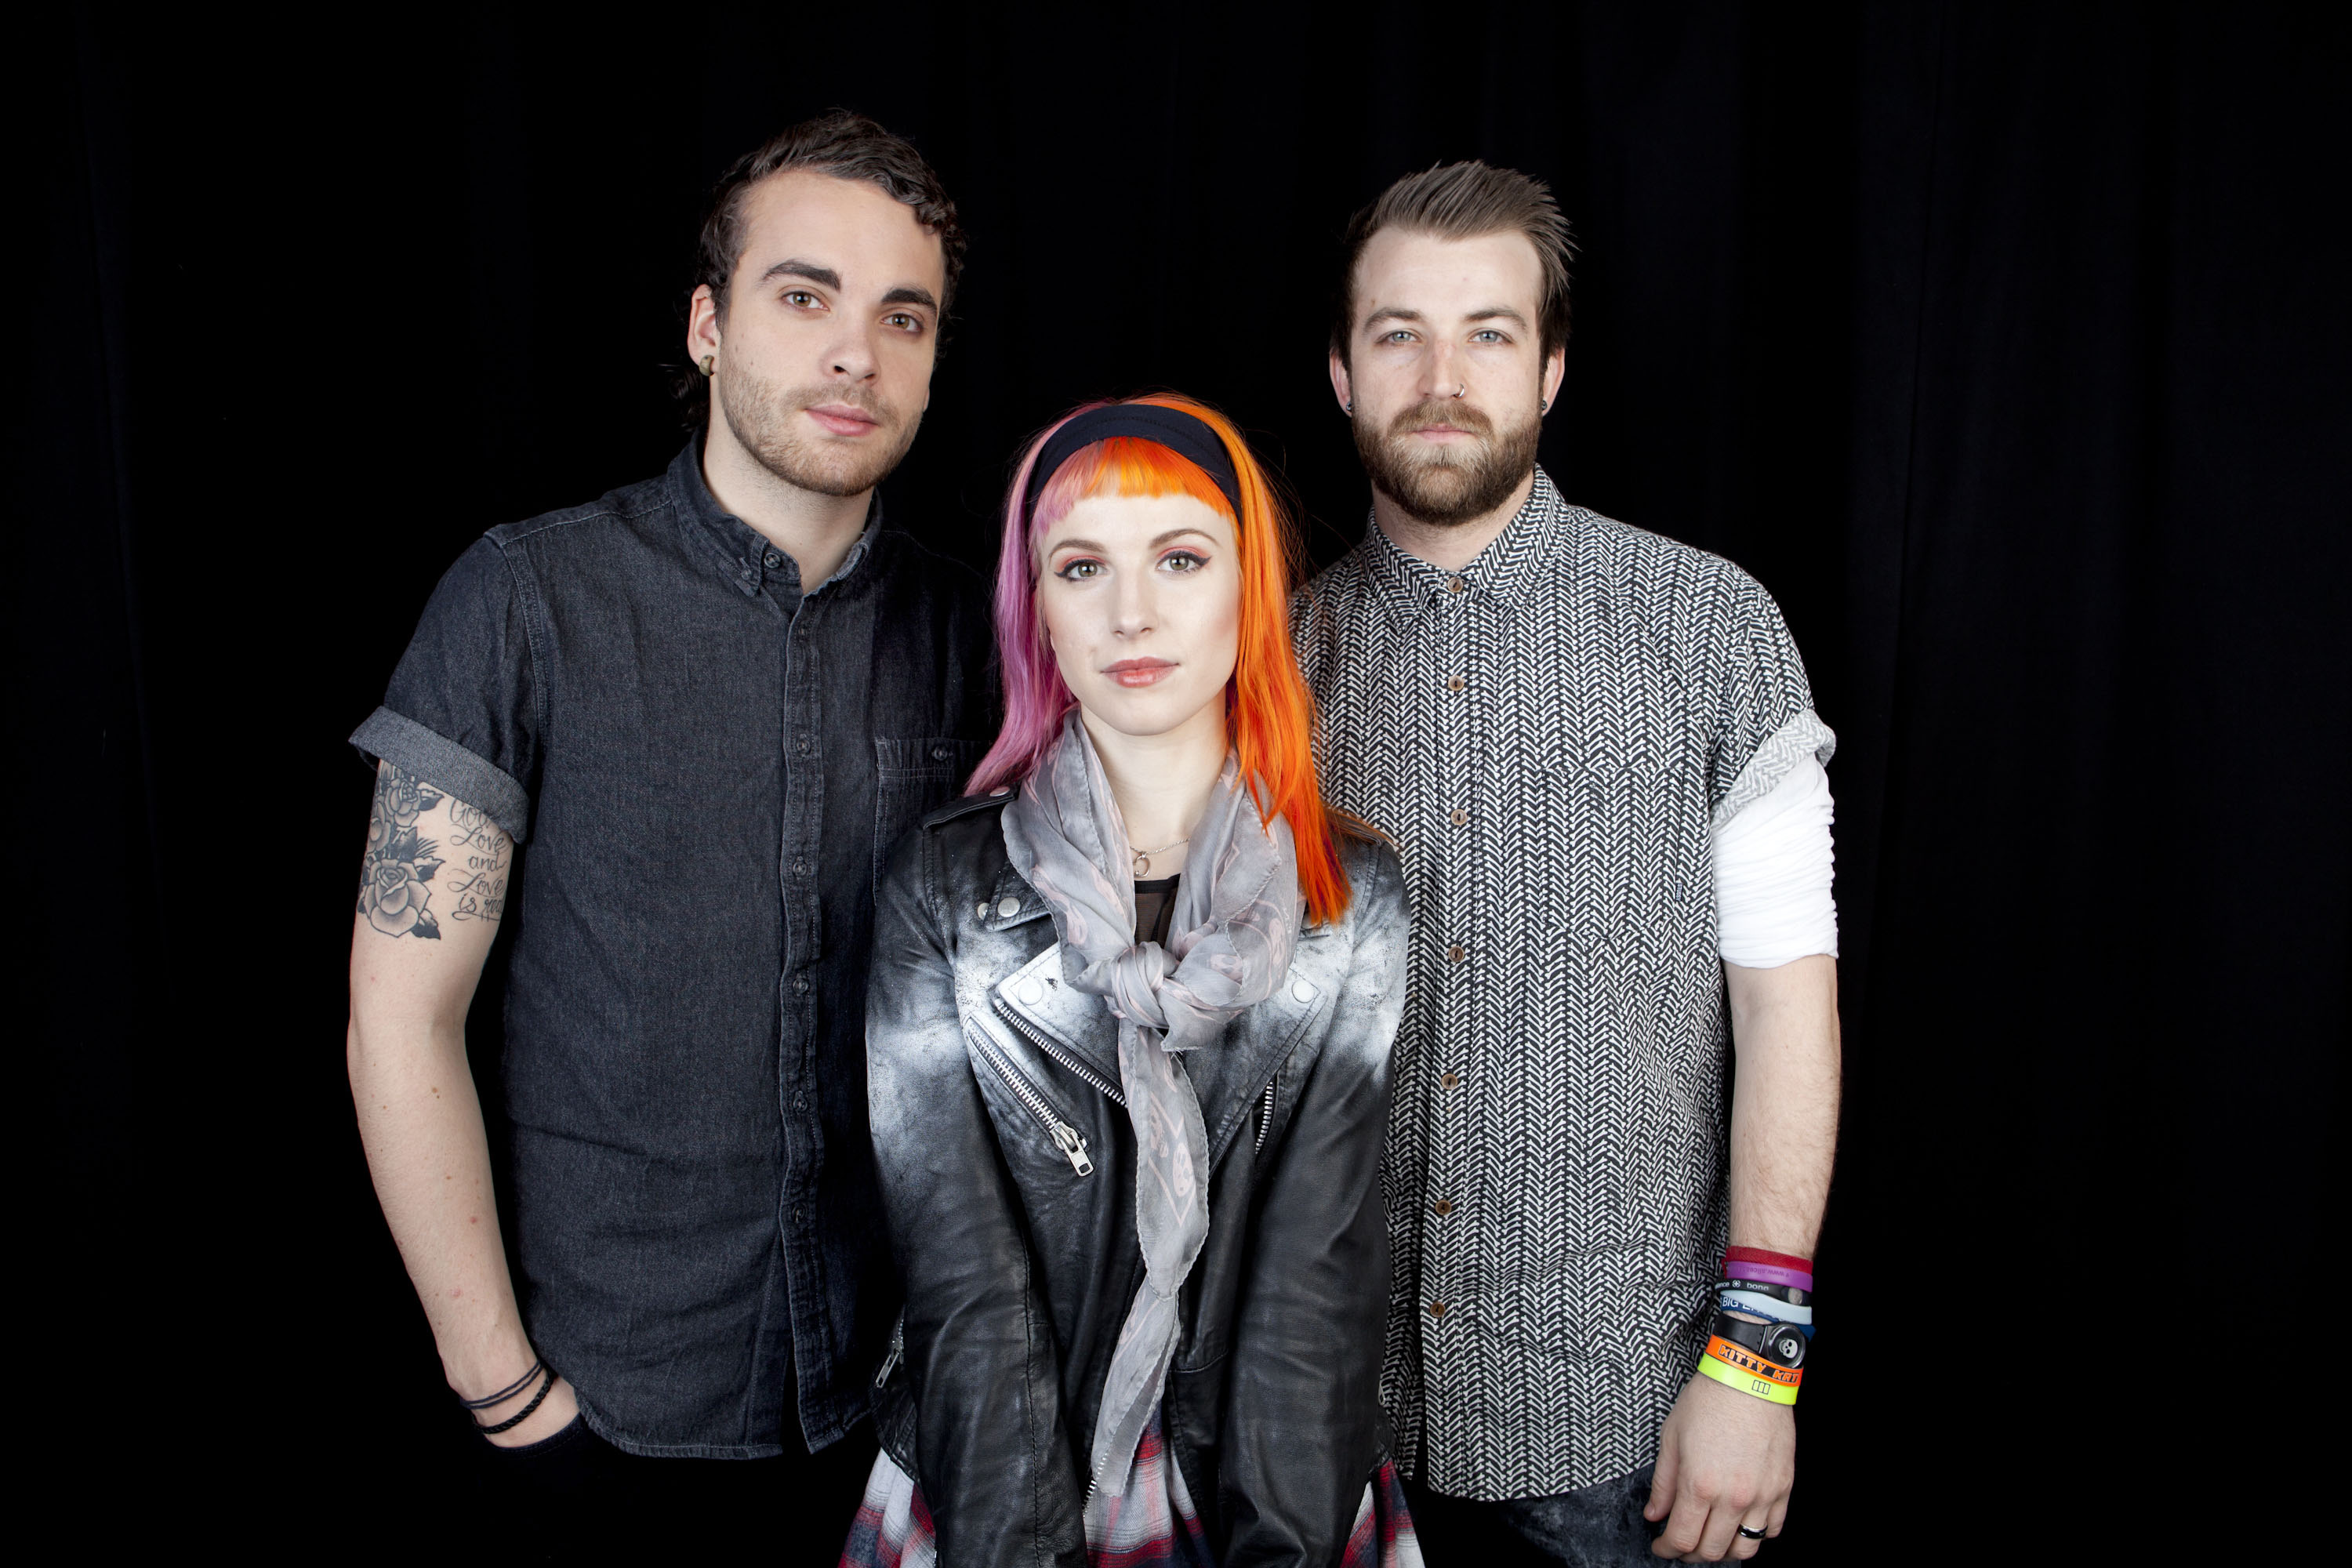 Paramore - Paramore - Unboxing 